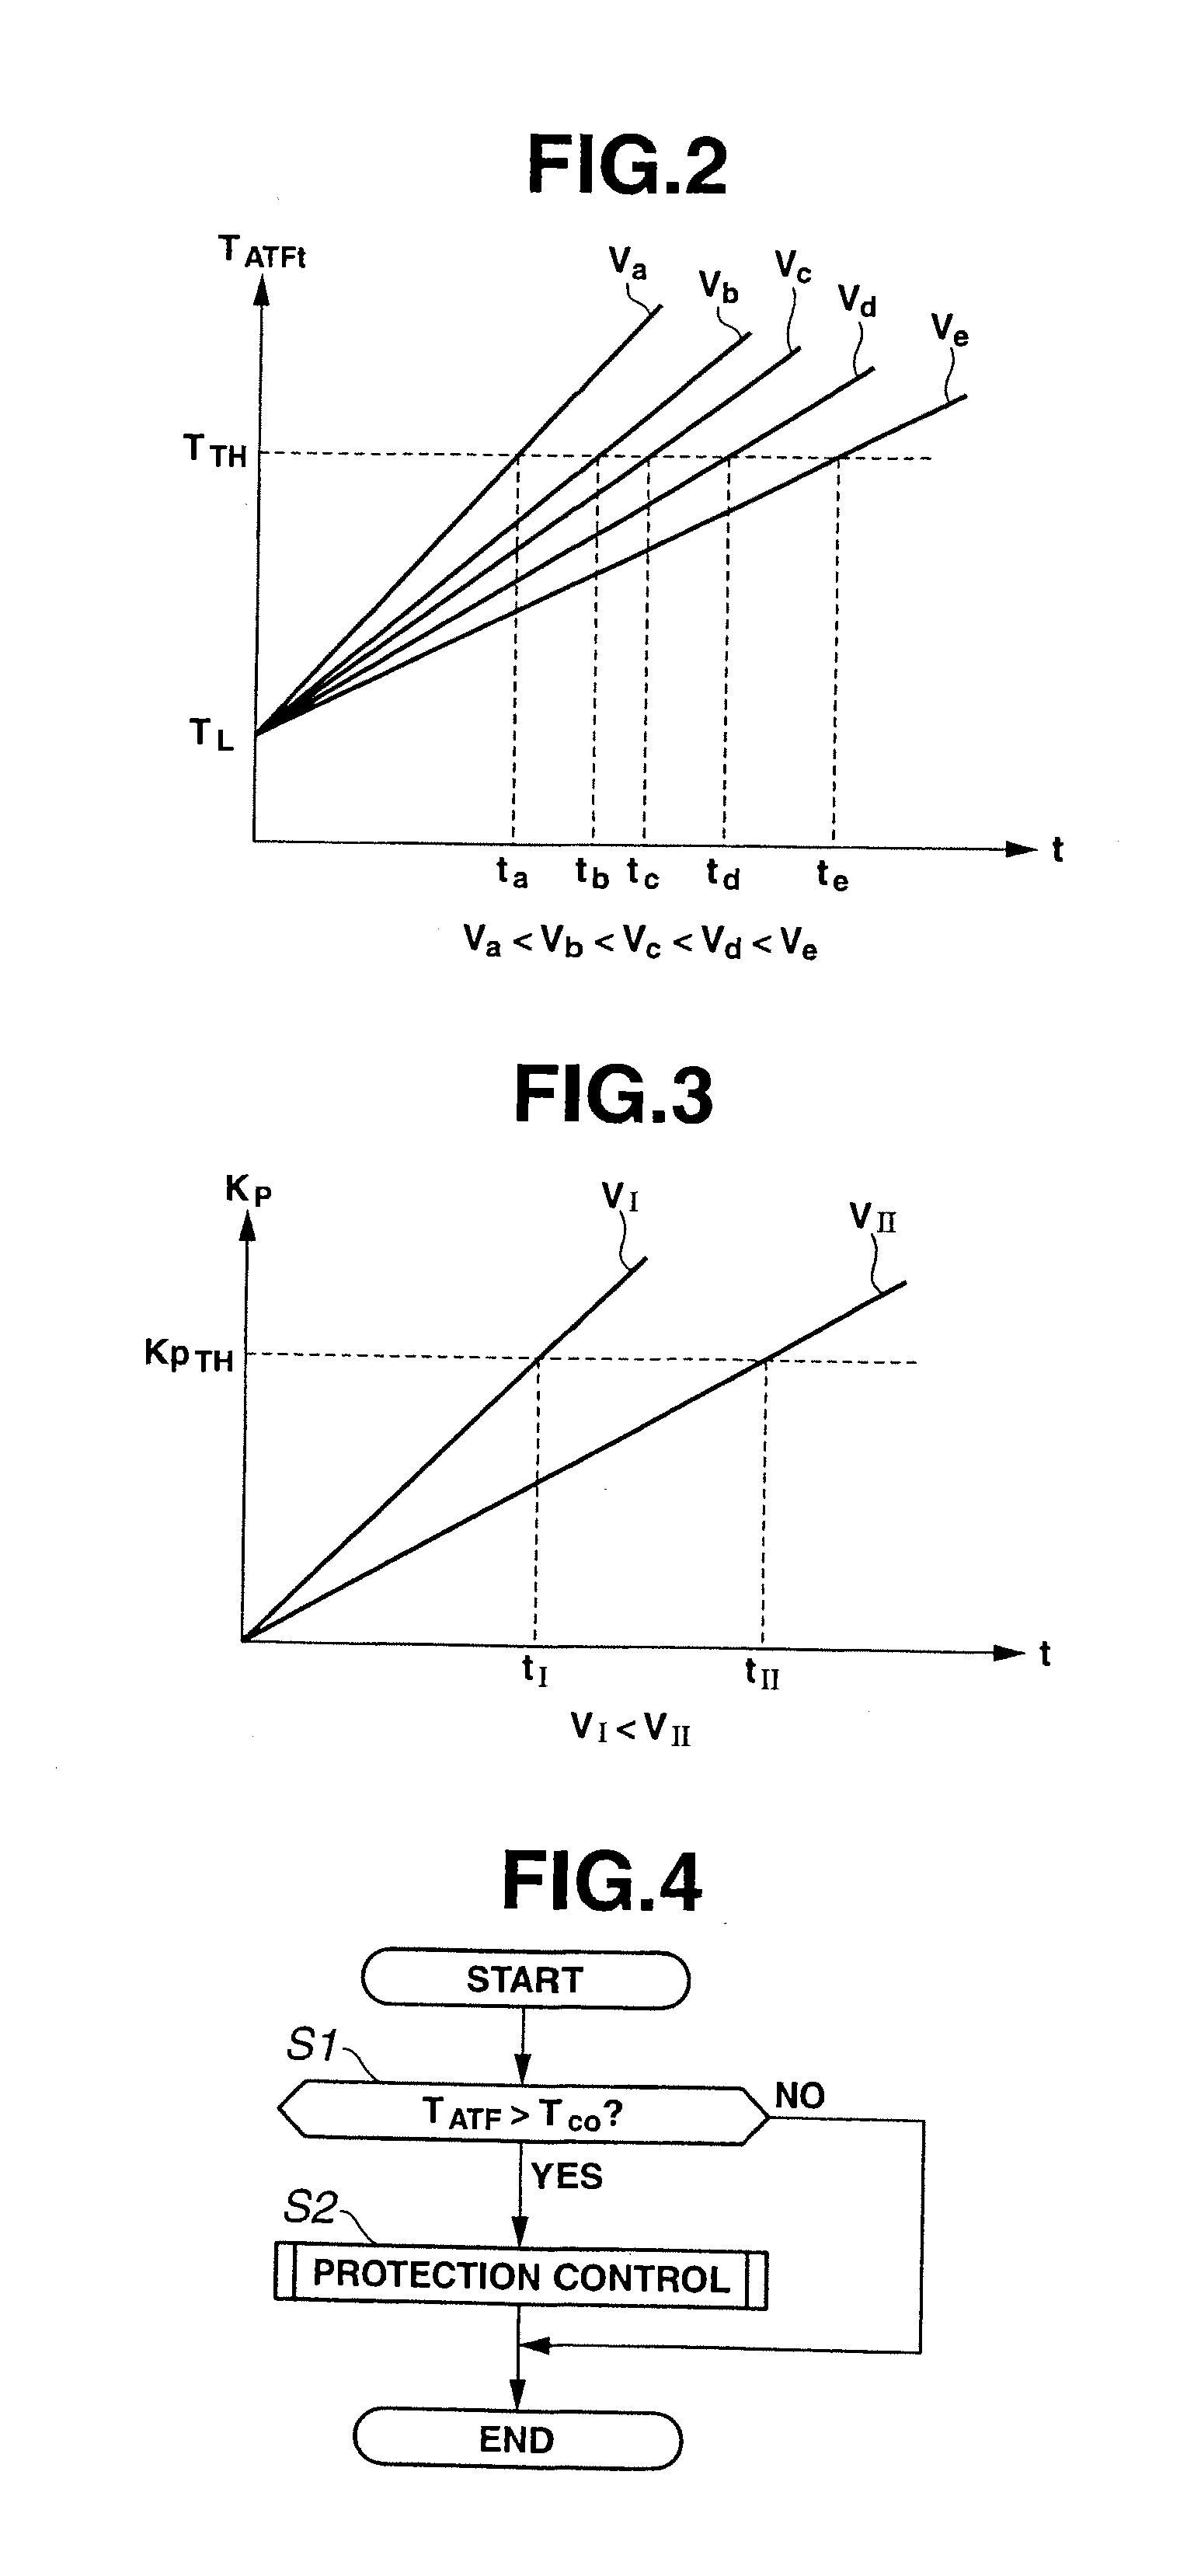 Output control apparatus of engine